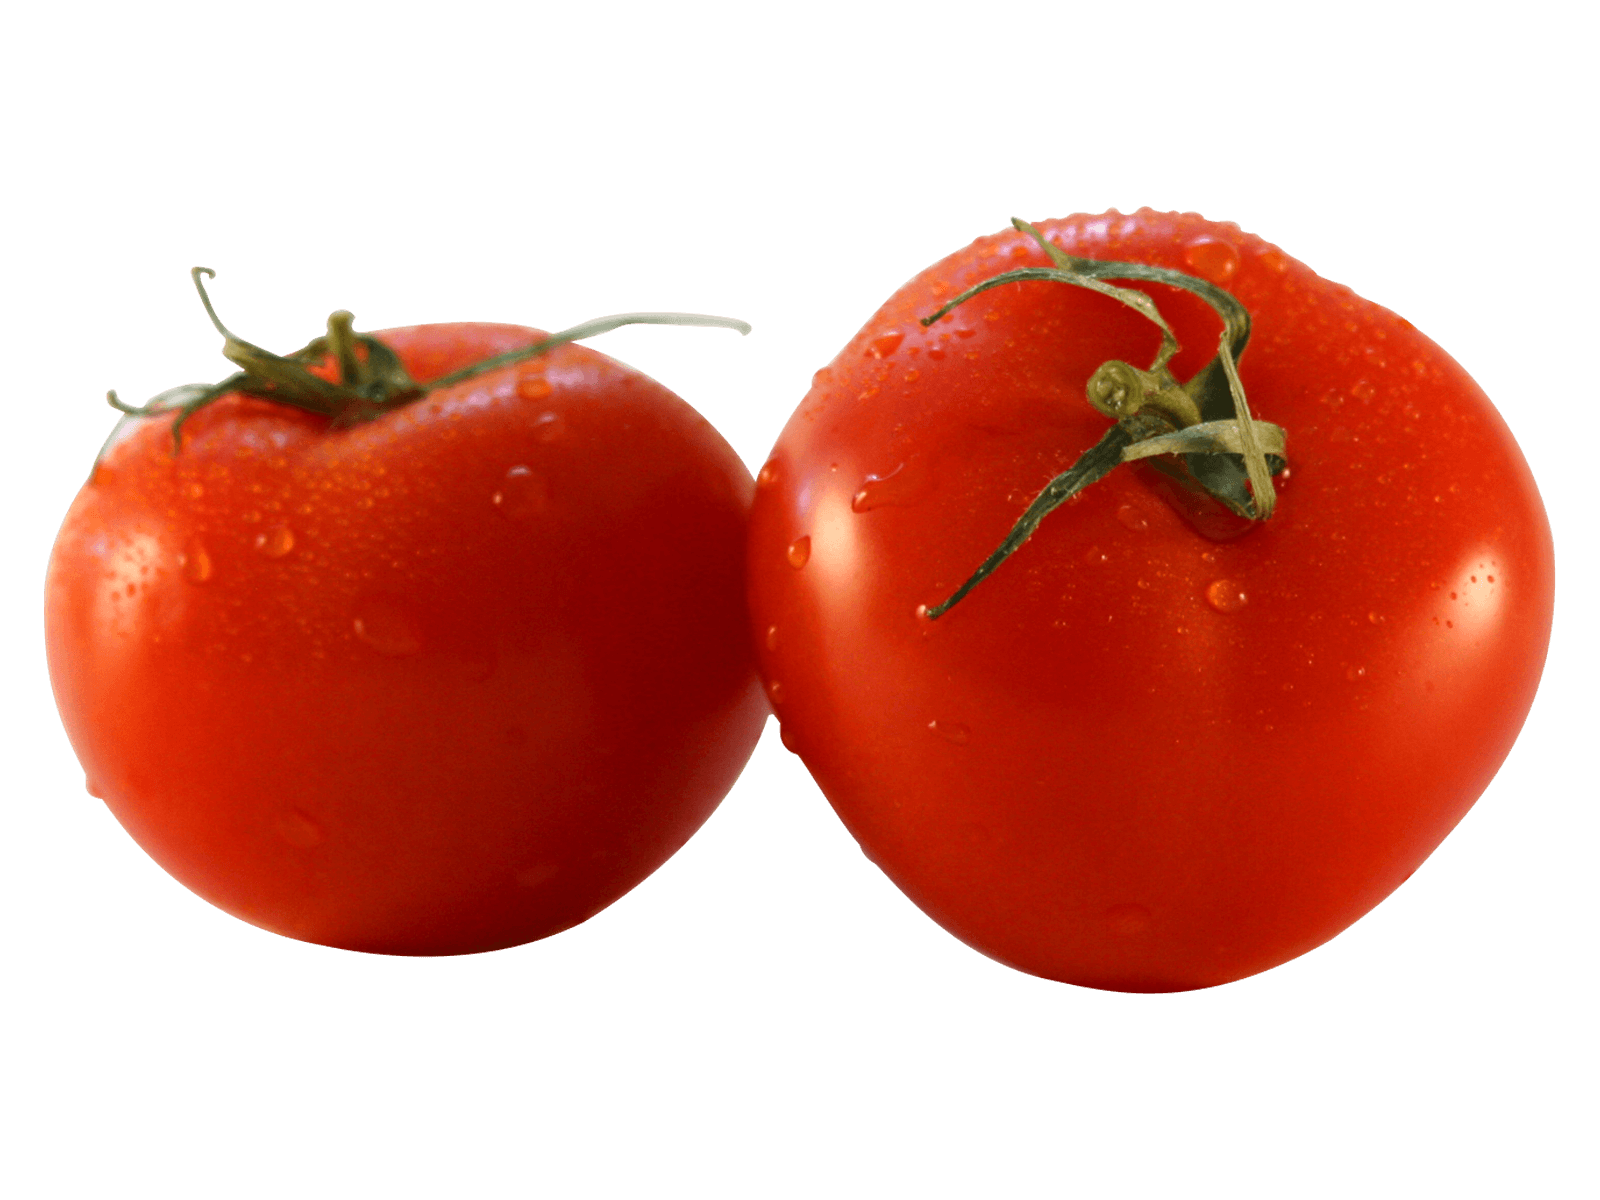 tomatoes Png Clip Art, tomatoes, tomatoes Transparent Png, tomatoes png transparent background, free download, lear tomatoes png, tomatoes png hd,